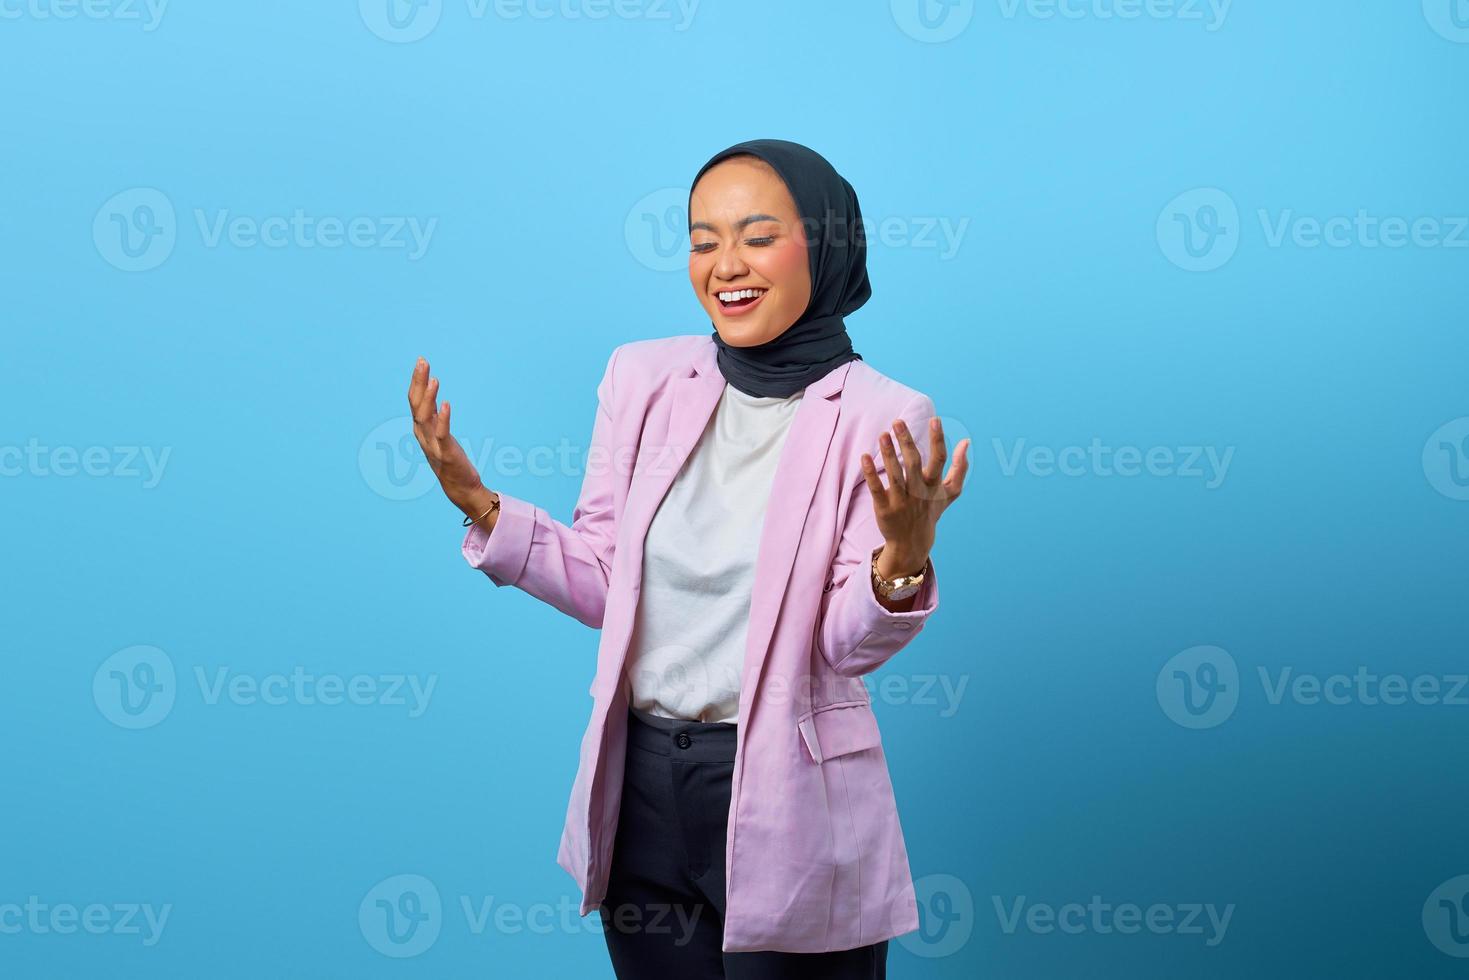 Happiness Asian woman celebrating success with laugh expression photo